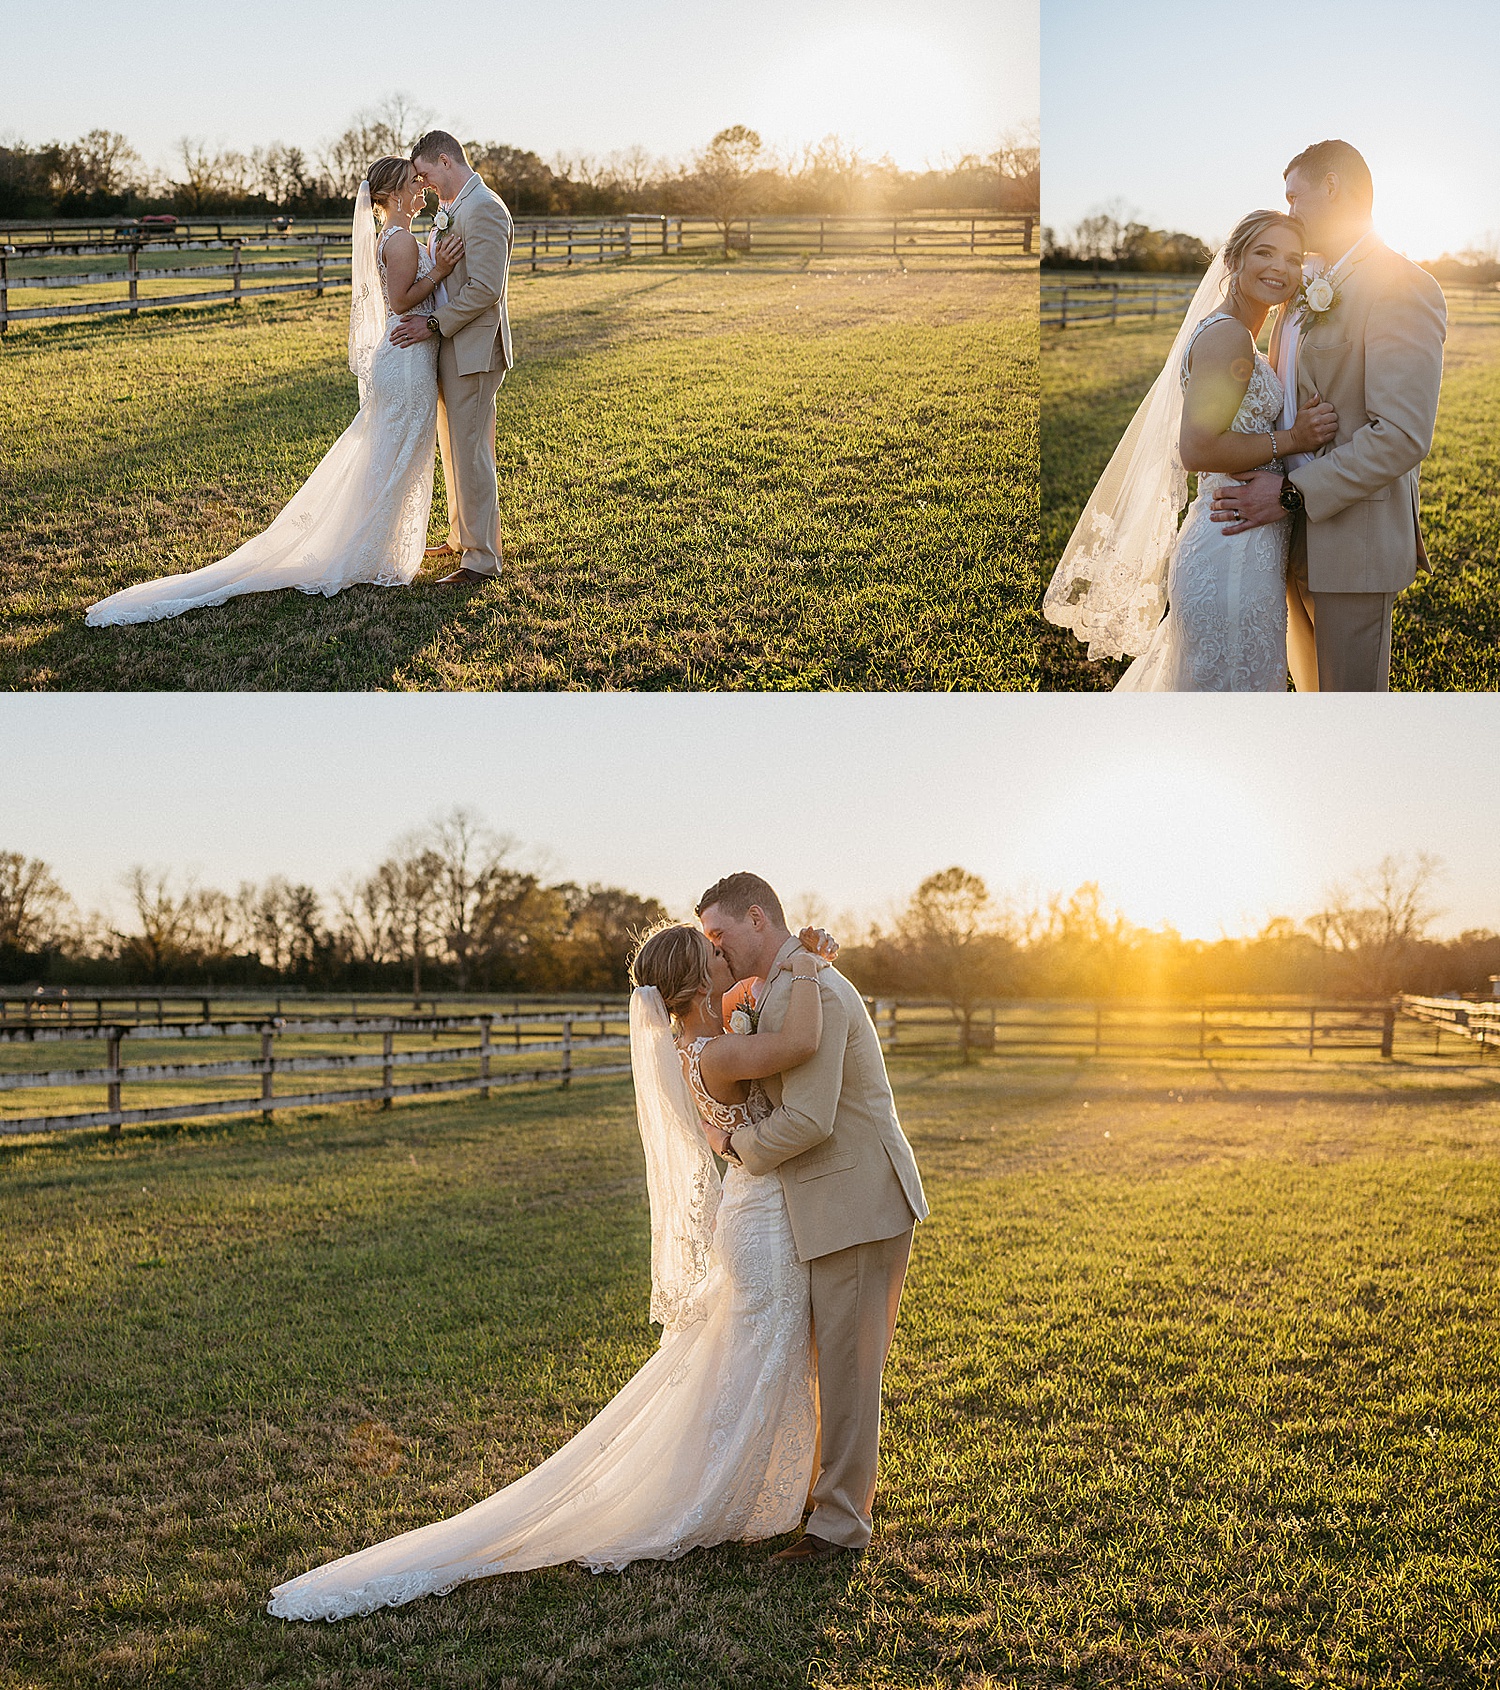 Bride and groom kiss at sunset at Lauren Hill Farm after wedding ceremony